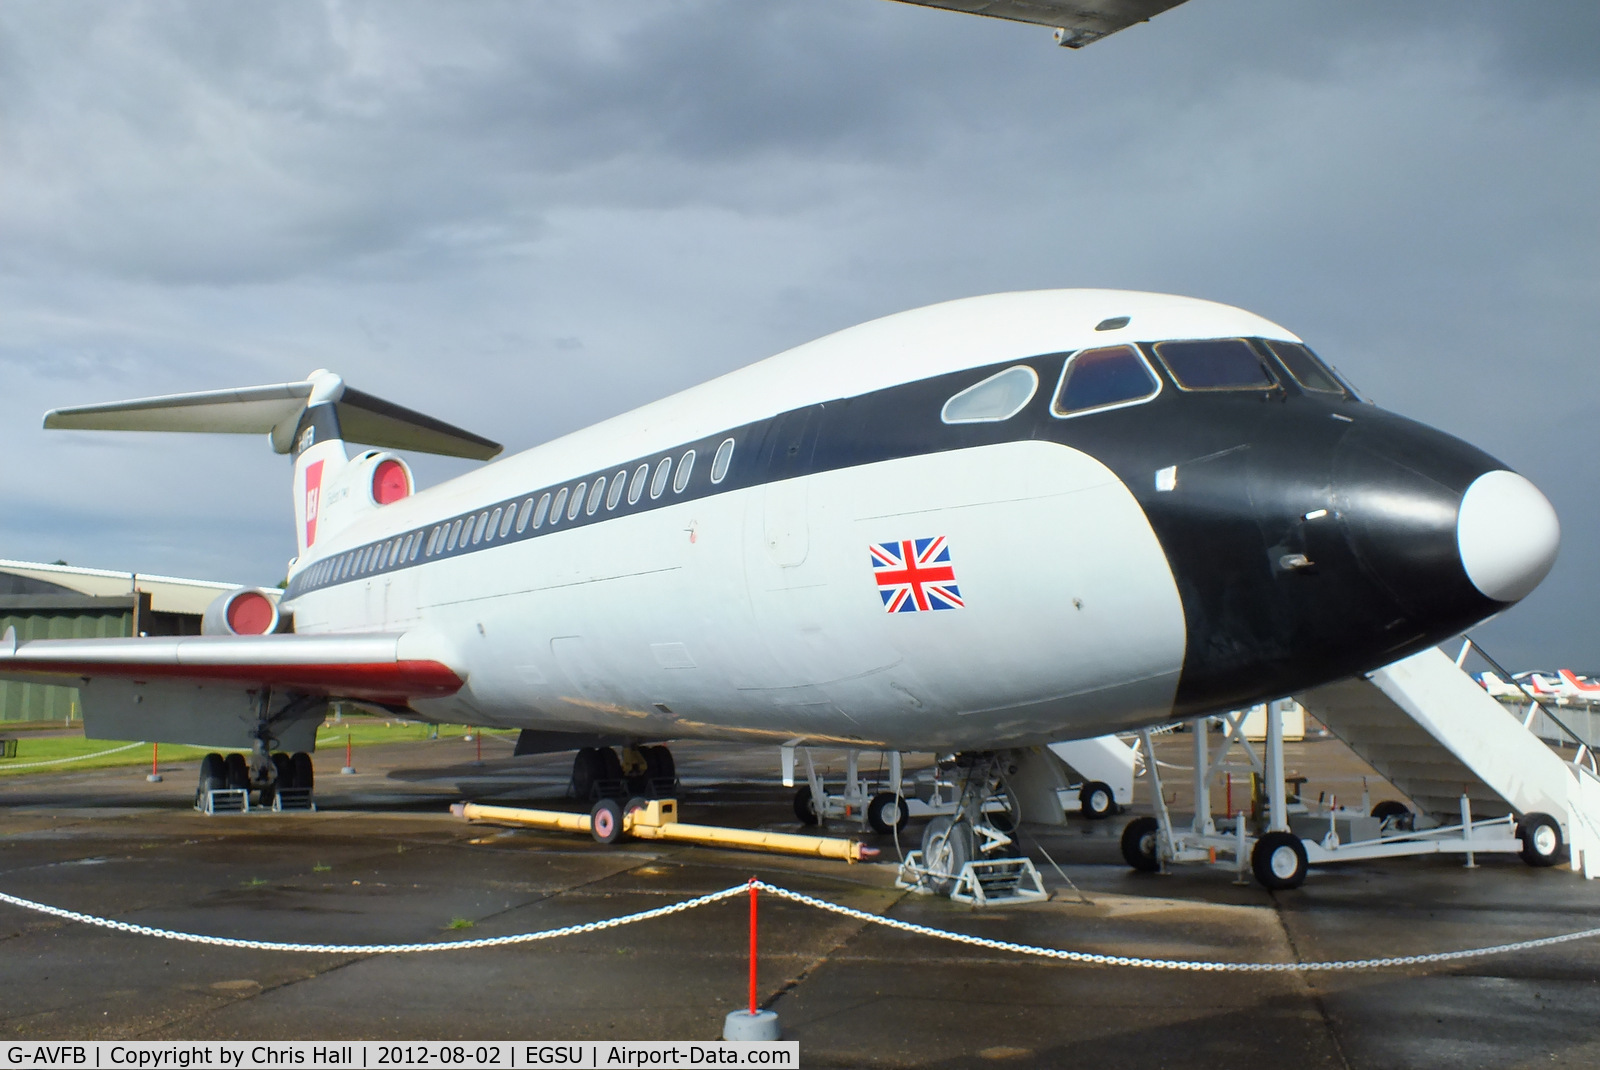 G-AVFB, 1967 Hawker Siddeley HS-121 Trident 2E C/N 2141, Preserved by the Duxford Aviation Society in the original BEA 